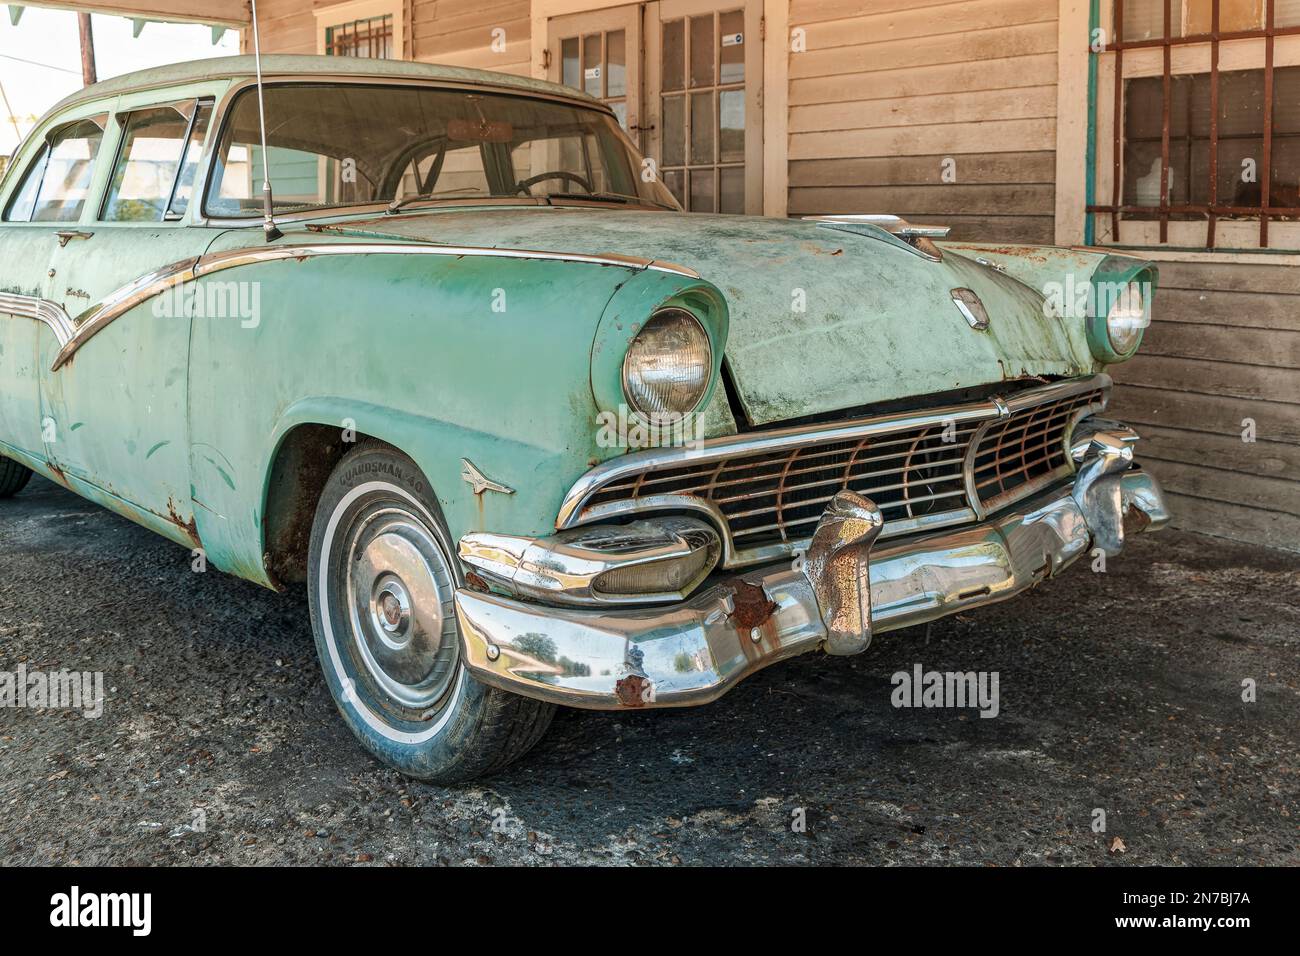 Vintage or antique 1956 Ford Fairlane Town Sedan front grill and hood of the old automobile in Alabama, USA. Stock Photo